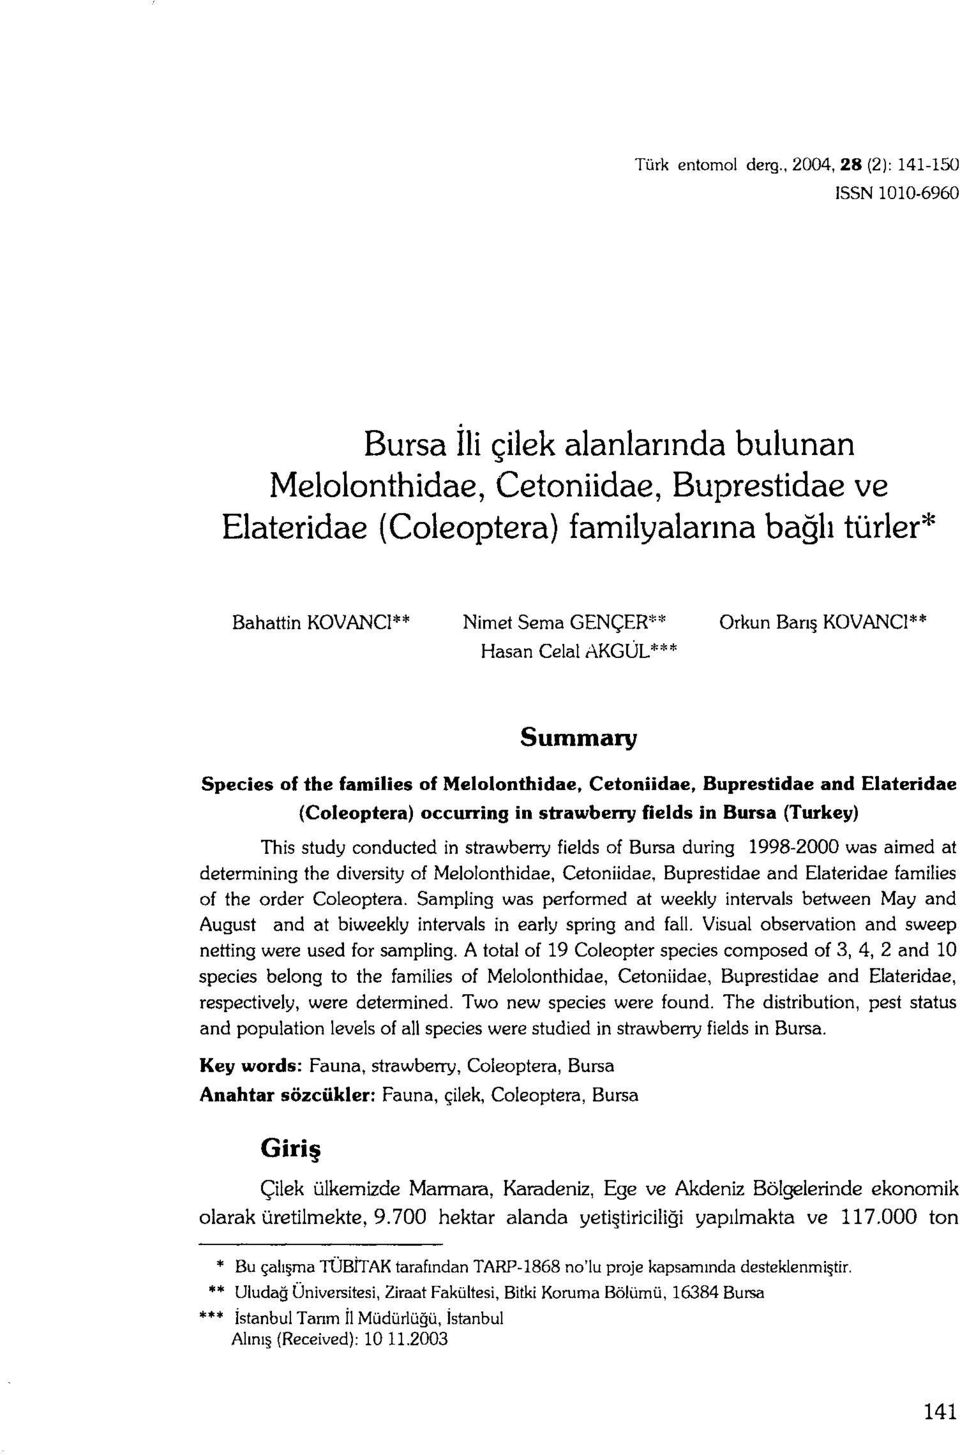 GENC;:ER** Hasan Celal AKGUL*** Orkun Bans KOVANCI** Summary Species of the families of Melolonthidae.